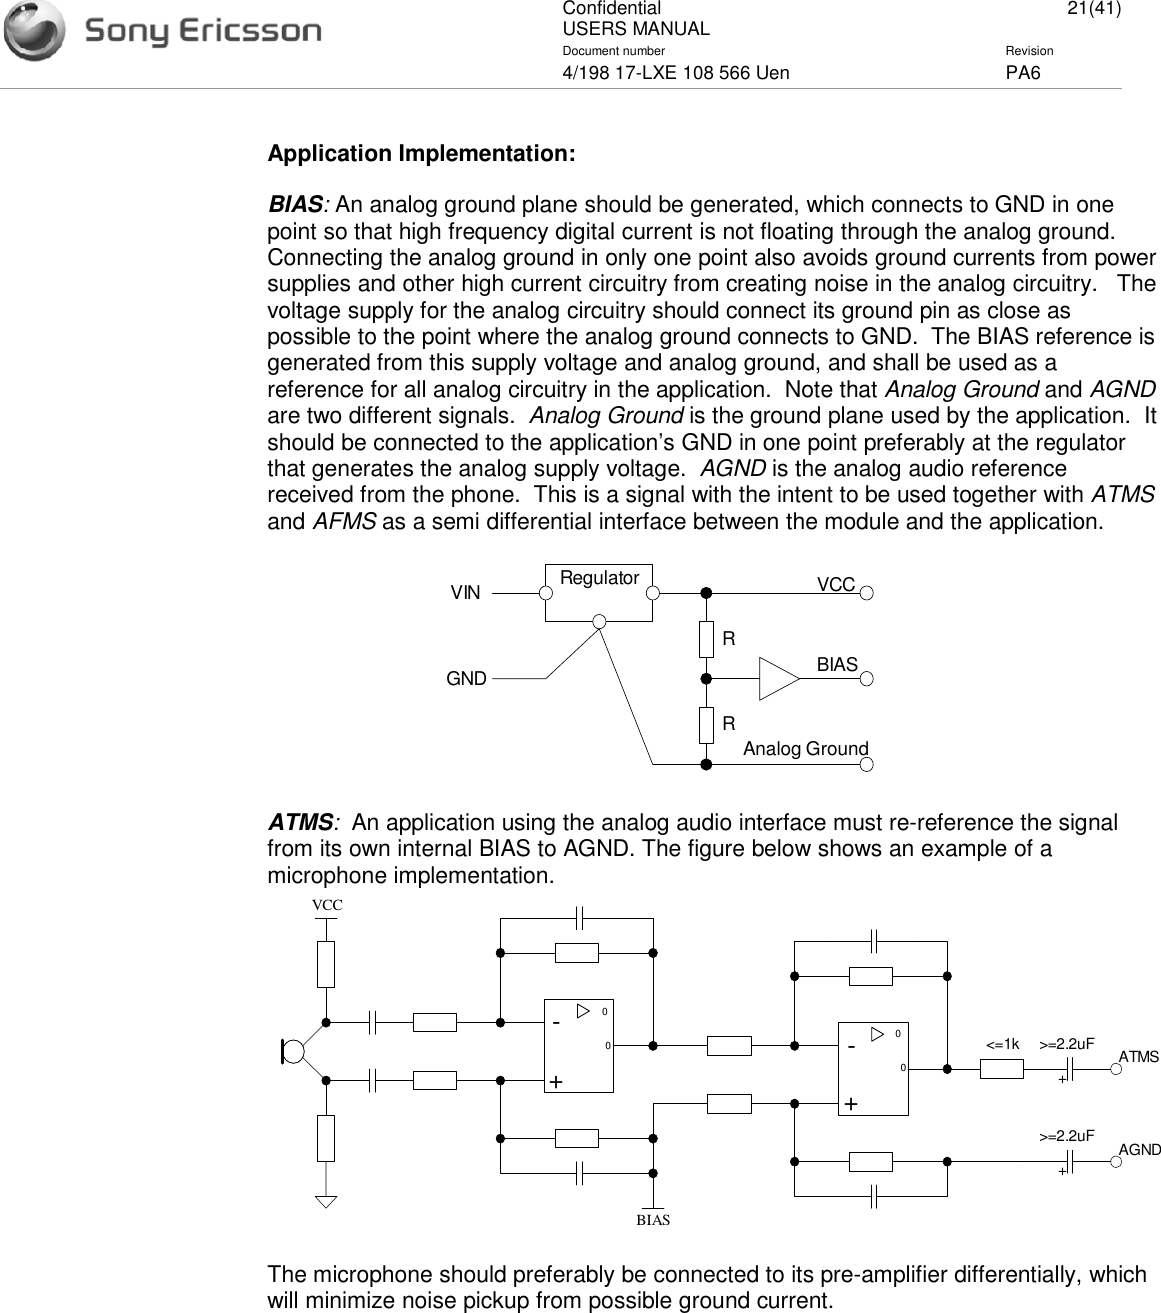 ConfidentialUSERS MANUAL 21(41)Document number Revision4/198 17-LXE 108 566 Uen PA6Application Implementation:BIAS:An analog ground plane should be generated, which connects to GND in onepoint so that high frequency digital current is not floating through the analog ground.Connecting the analog ground in only one point also avoids ground currents from powersupplies and other high current circuitry from creating noise in the analog circuitry. Thevoltage supply for the analog circuitry should connect its ground pin as close aspossible to the point where the analog ground connects to GND. The BIAS reference isgenerated from this supply voltage and analog ground, and shall be used as areference for all analog circuitry in the application. Note that Analog Ground and AGNDare two different signals. Analog Ground is the ground plane used by the application. Itshould be connected to the application’s GND in one point preferably at the regulatorthat generates the analog supply voltage. AGND is the analog audio referencereceived from the phone. This is a signal with the intent to be used together with ATMSand AFMS as a semi differential interface between the module and the application.RegulatorVINGNDRRVCCBIASAnalog GroundATMS:An application using the analog audio interface must re-reference the signalfrom its own internal BIAS to AGND. The figure below shows an example of amicrophone implementation.0-+0VCC0-+0&lt;=1kBIAS&gt;=2.2uF ATMSAGND&gt;=2.2uF++The microphone should preferably be connected to its pre-amplifier differentially, whichwill minimize noise pickup from possible ground current.